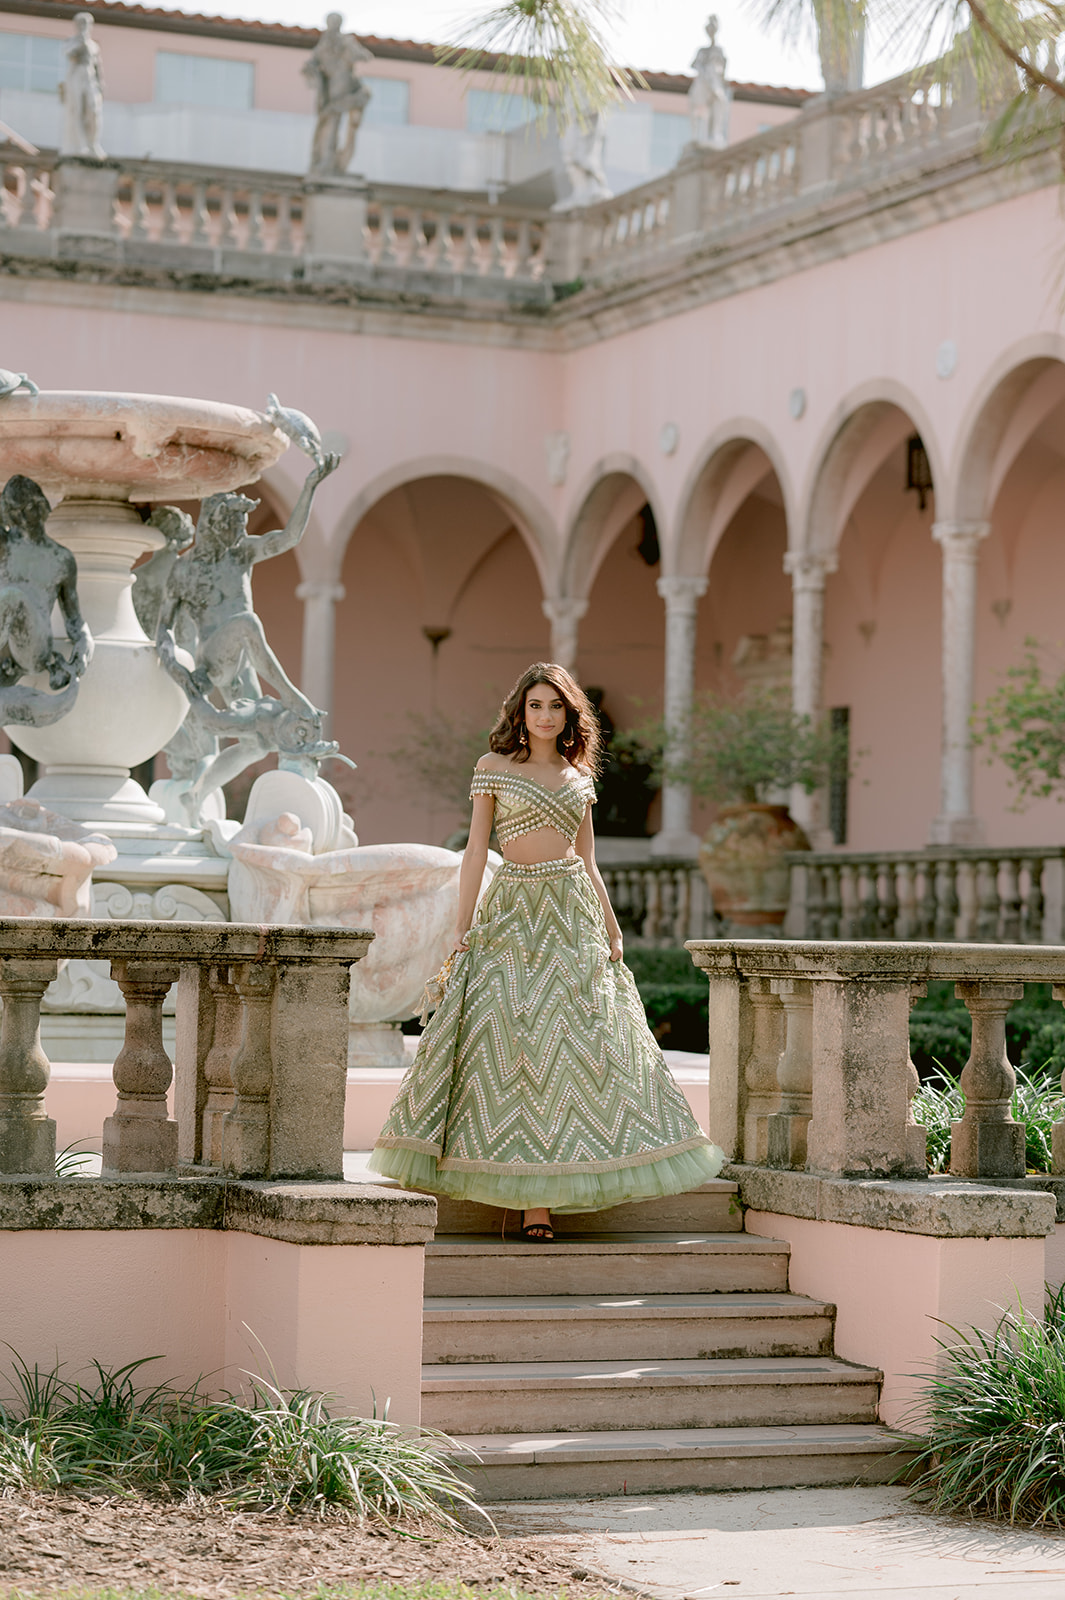 "Ca' d'Zan at the Ringling Museum as a picturesque setting for engagement photos"
